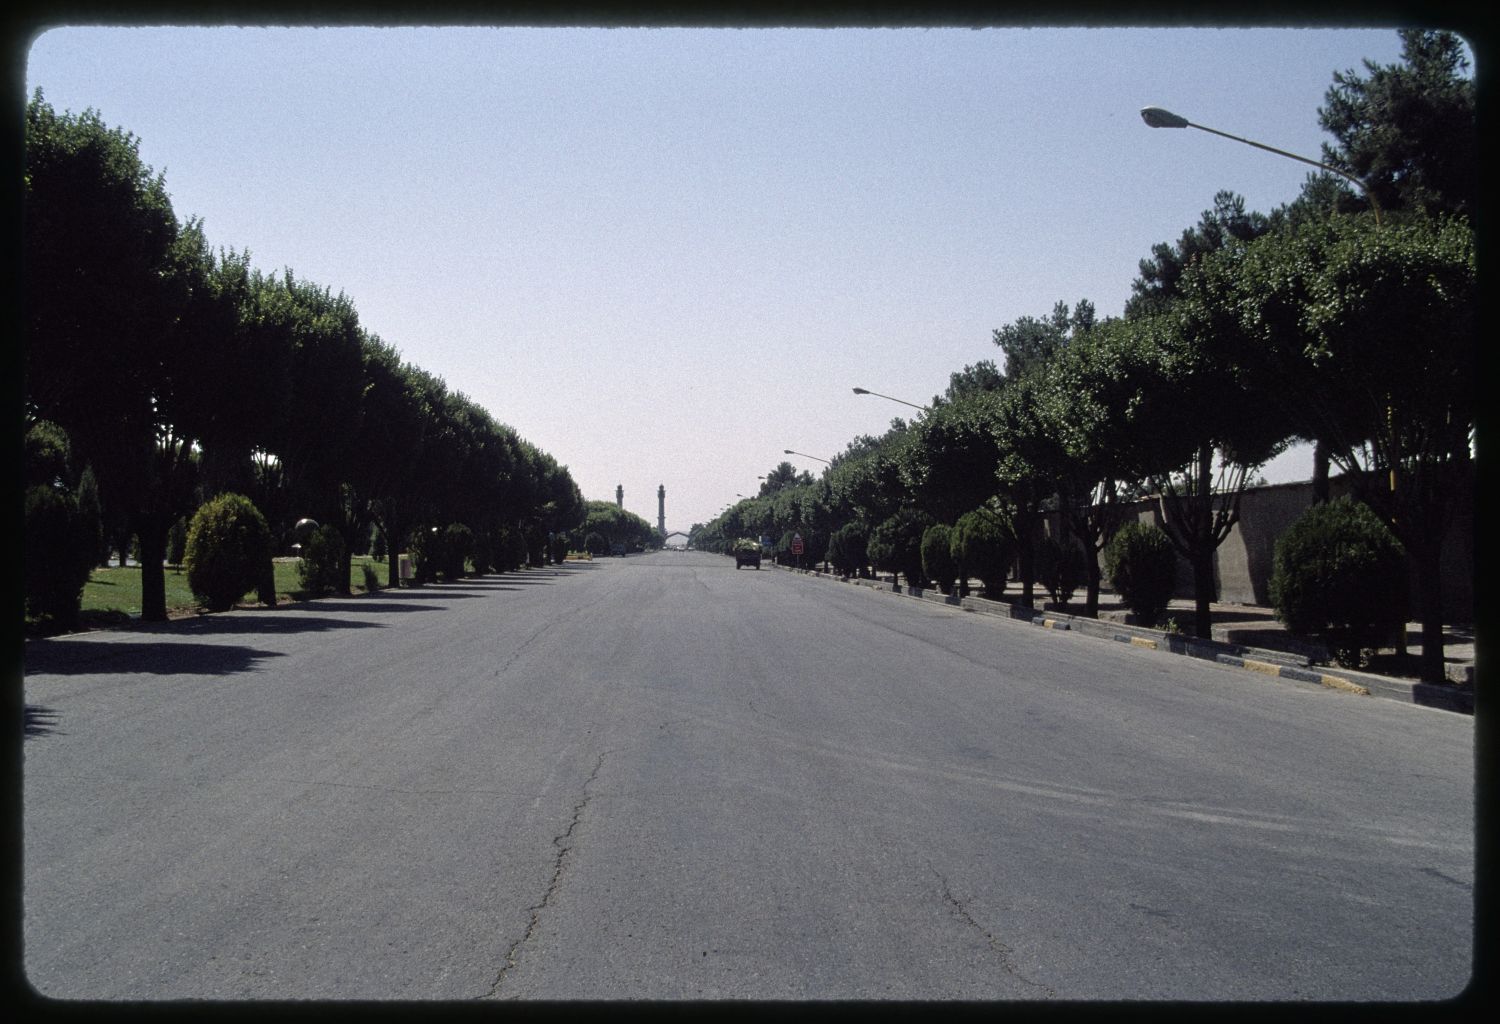 View along road, facing west.